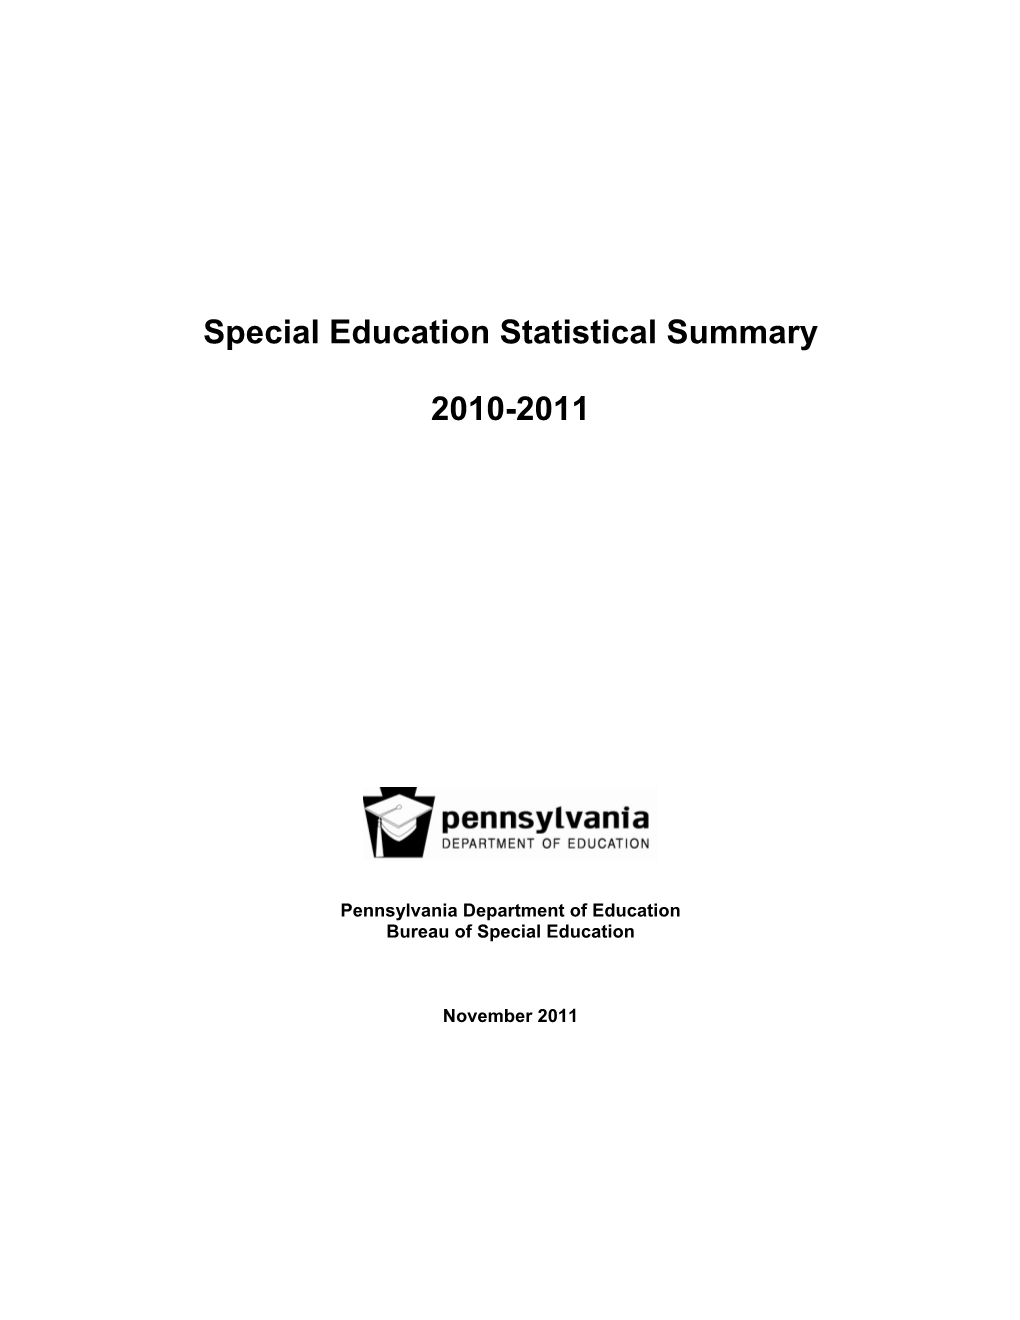 Special Education Statistical Summary 2010-2011